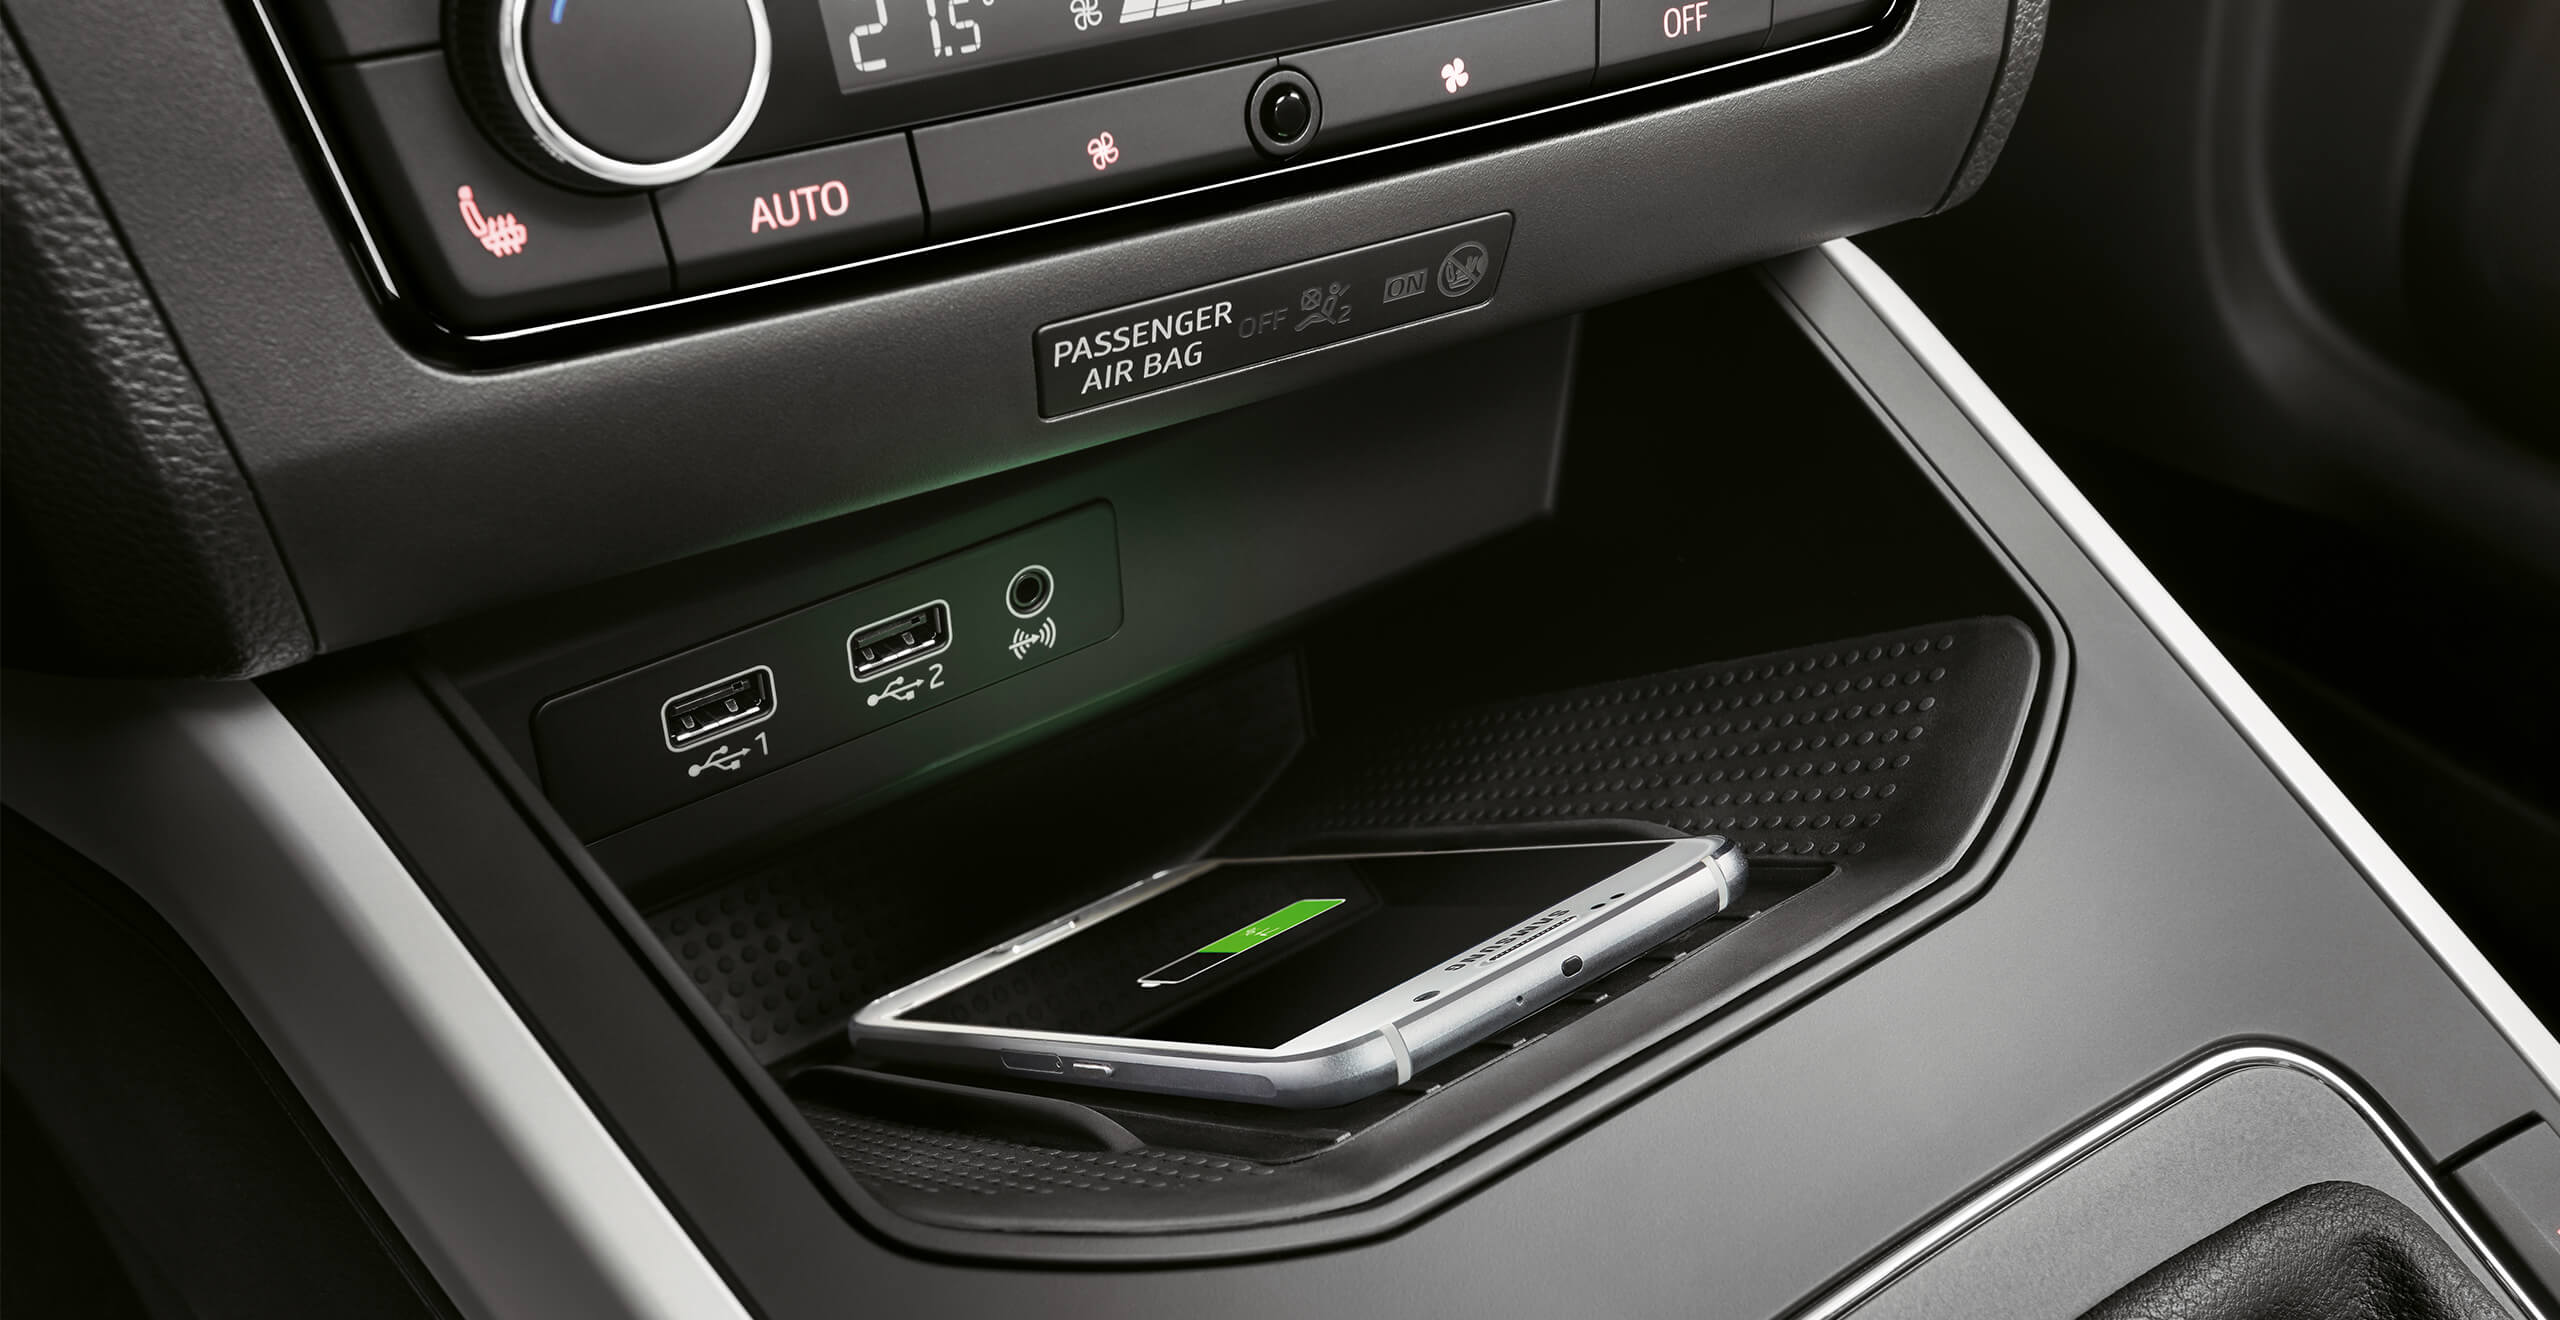 full link connectivity. SEAT Arona interior console connectivity wireless charger: wireless phone charging, keyless entry SEAT car console